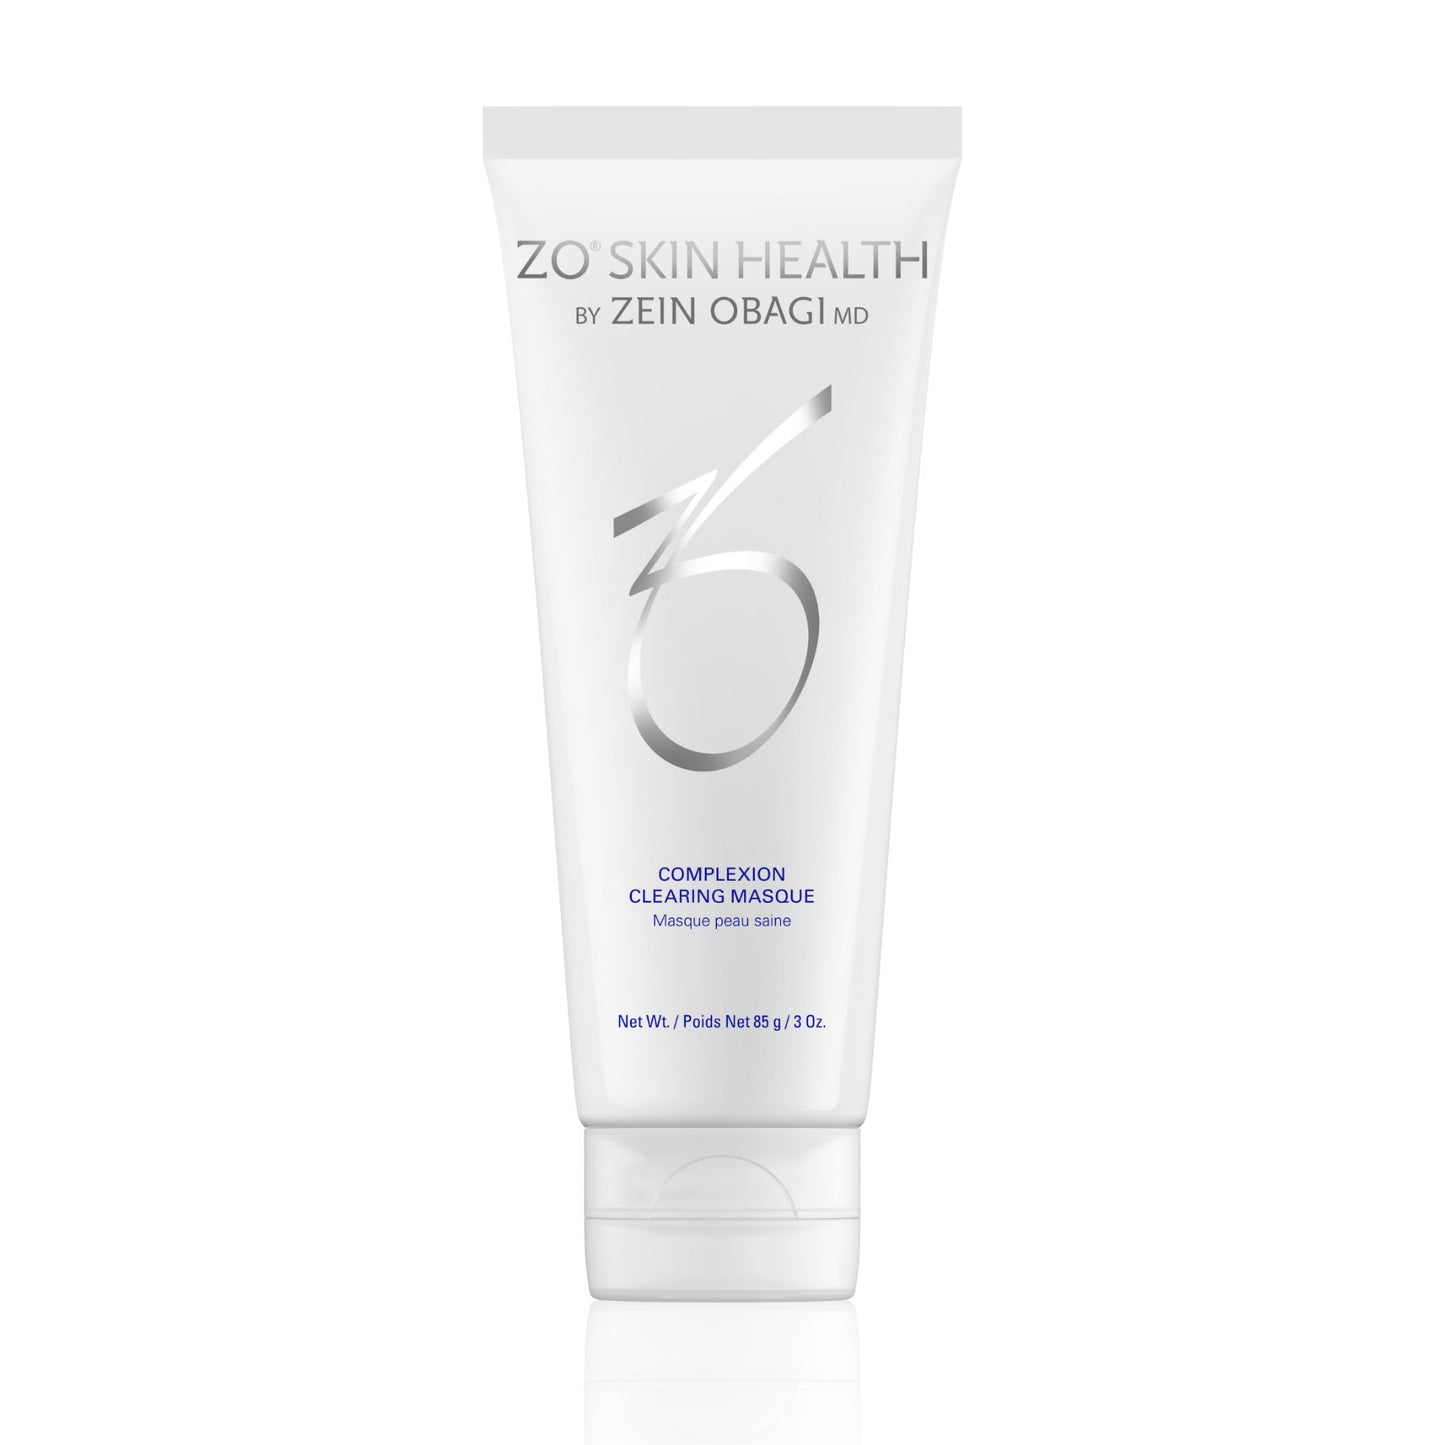 Complexion Clearing Masque from ZO Skin Health